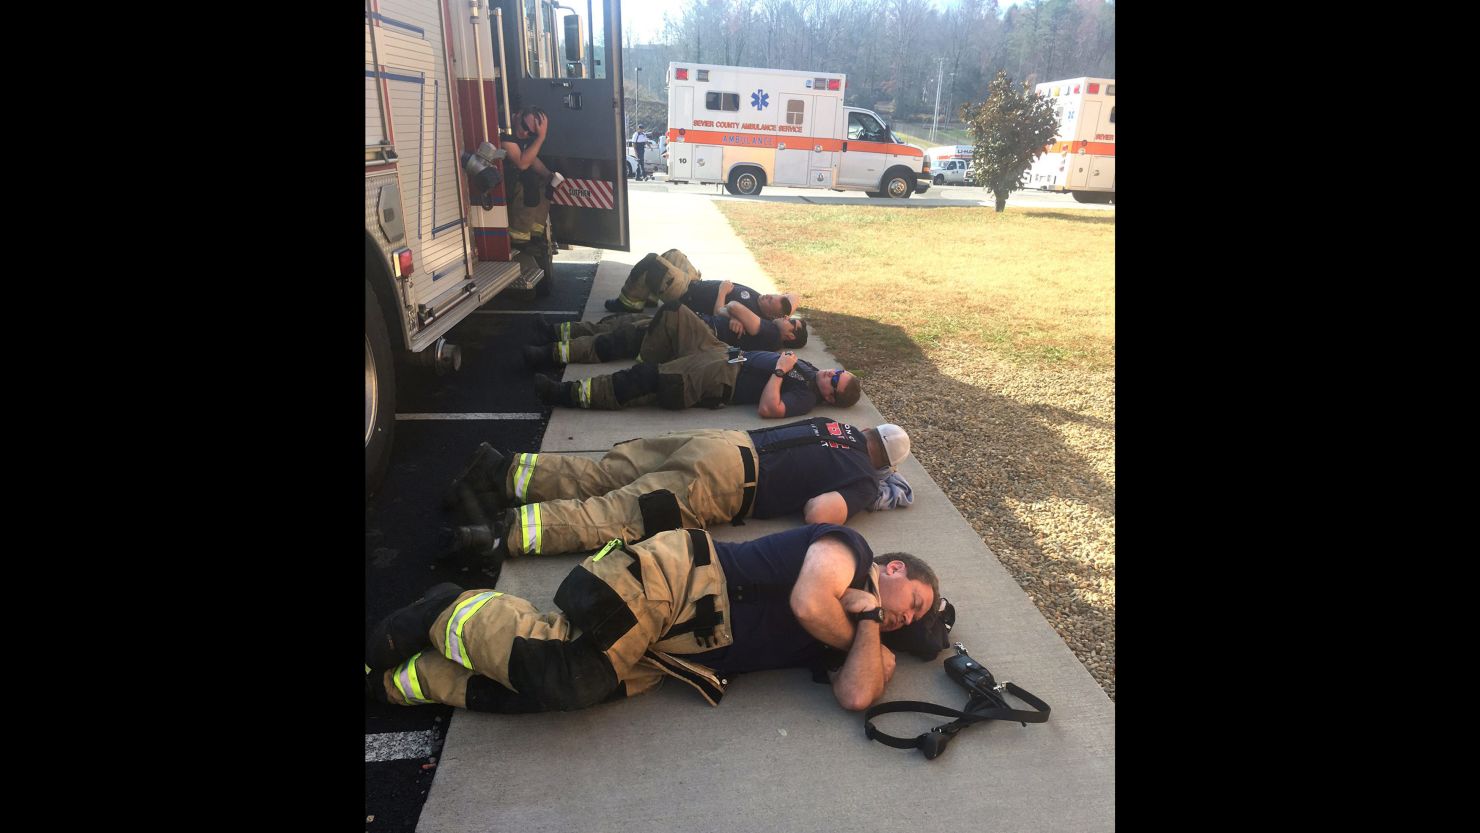 After spending thirty hours fighting the wildfires in Gatlinburg, these firefighters took a much deserved break right on the sidewalk.